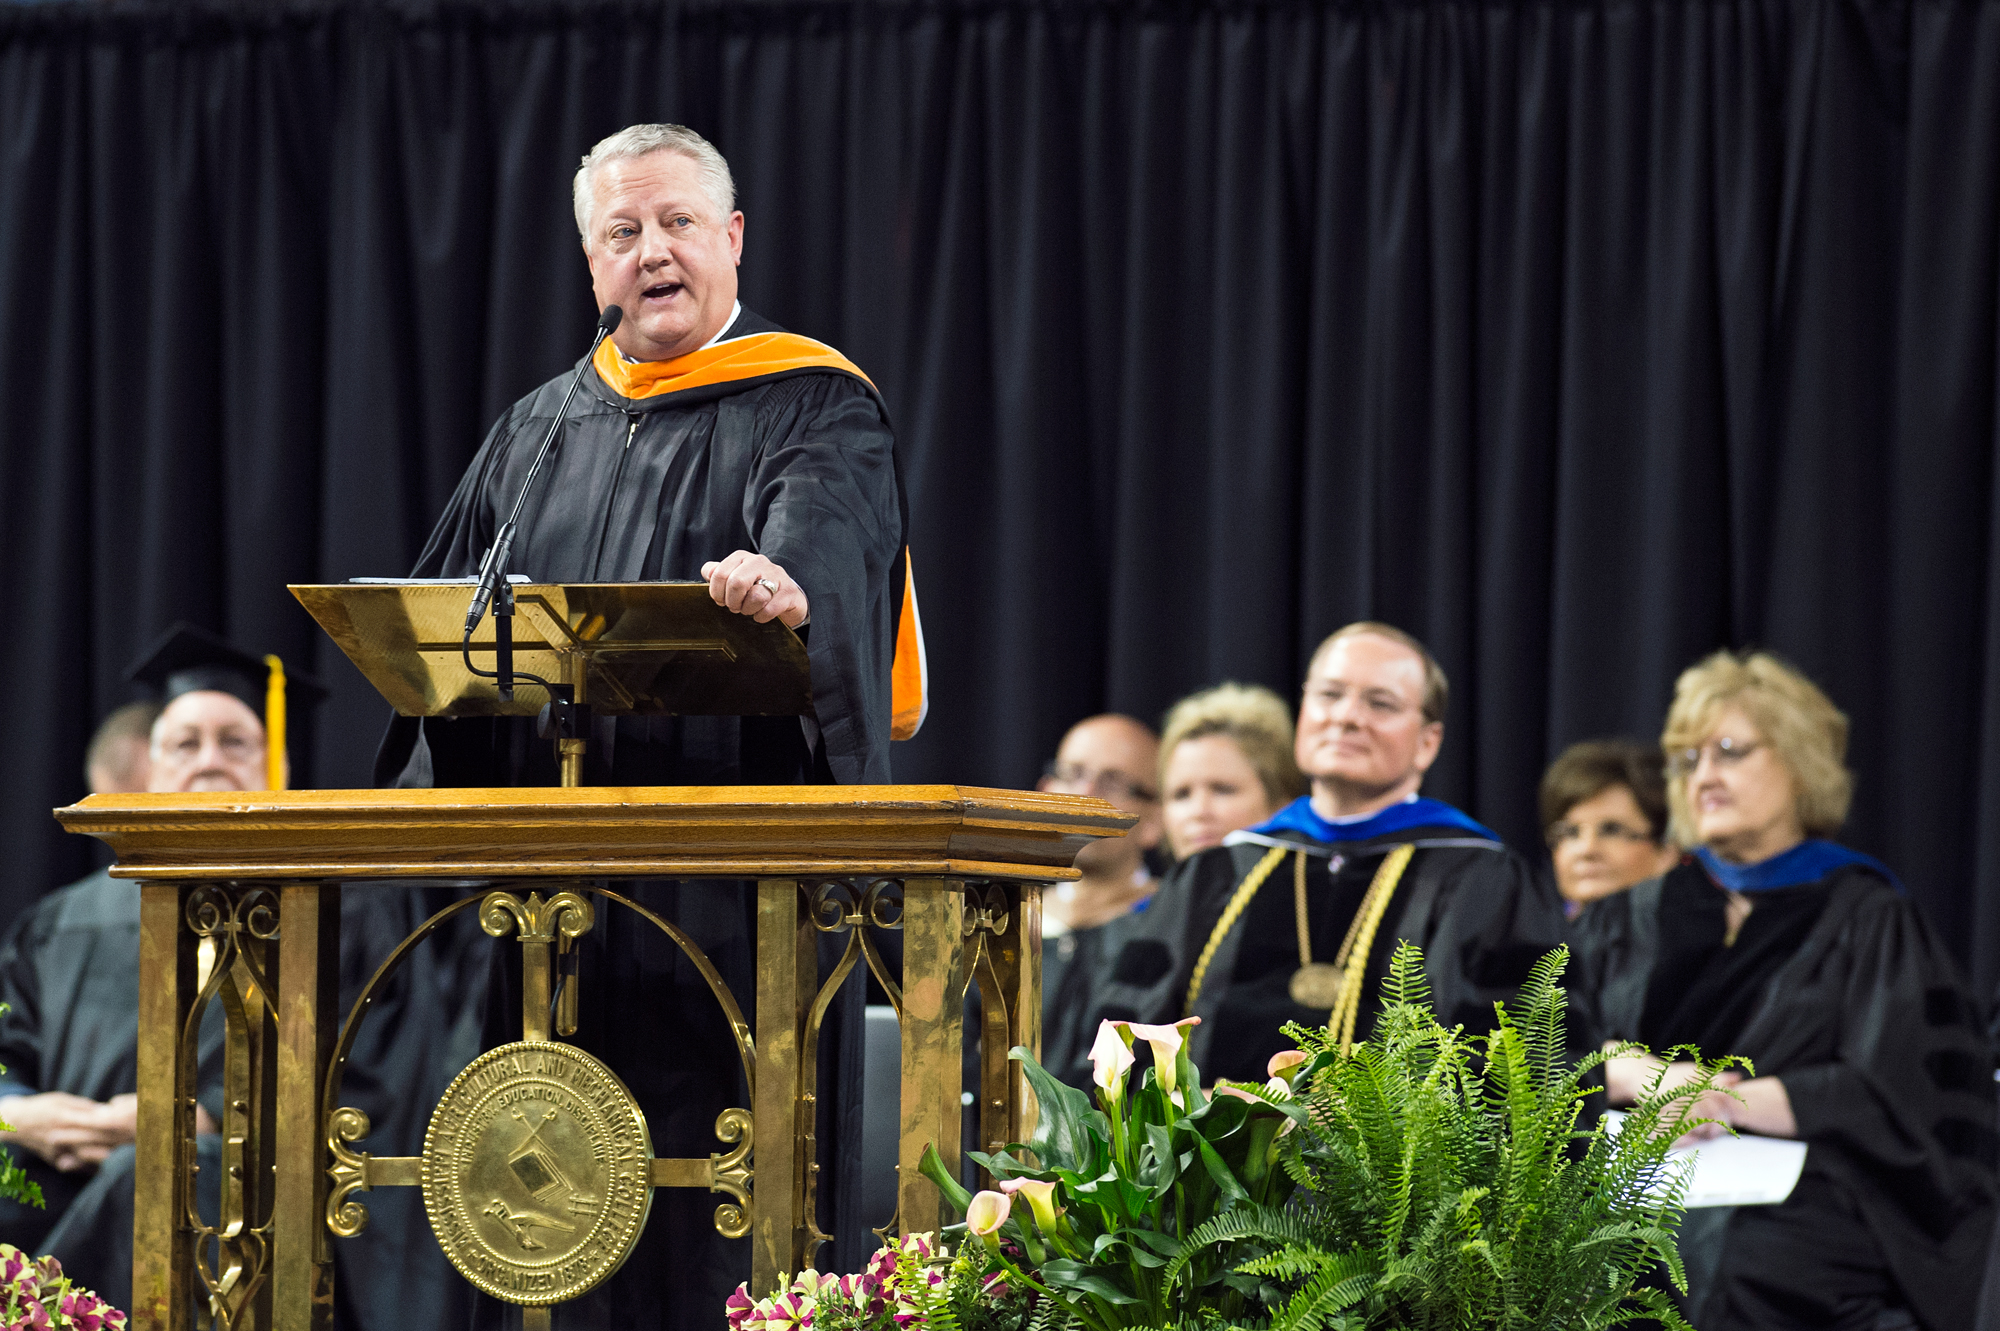 Mississippi State alumnus Tommy Nusz spoke about success in life and business during spring 2015 commencement exercises at Humphrey Coliseum. He shared advice with graduates from his personal experiences and more than 30-year career in the oil industry. The 1982 petroleum engineering graduate now is CEO and chairman of the board of Oasis Petroleum, a $4.5 billion enterprise he helped launch in 2007.